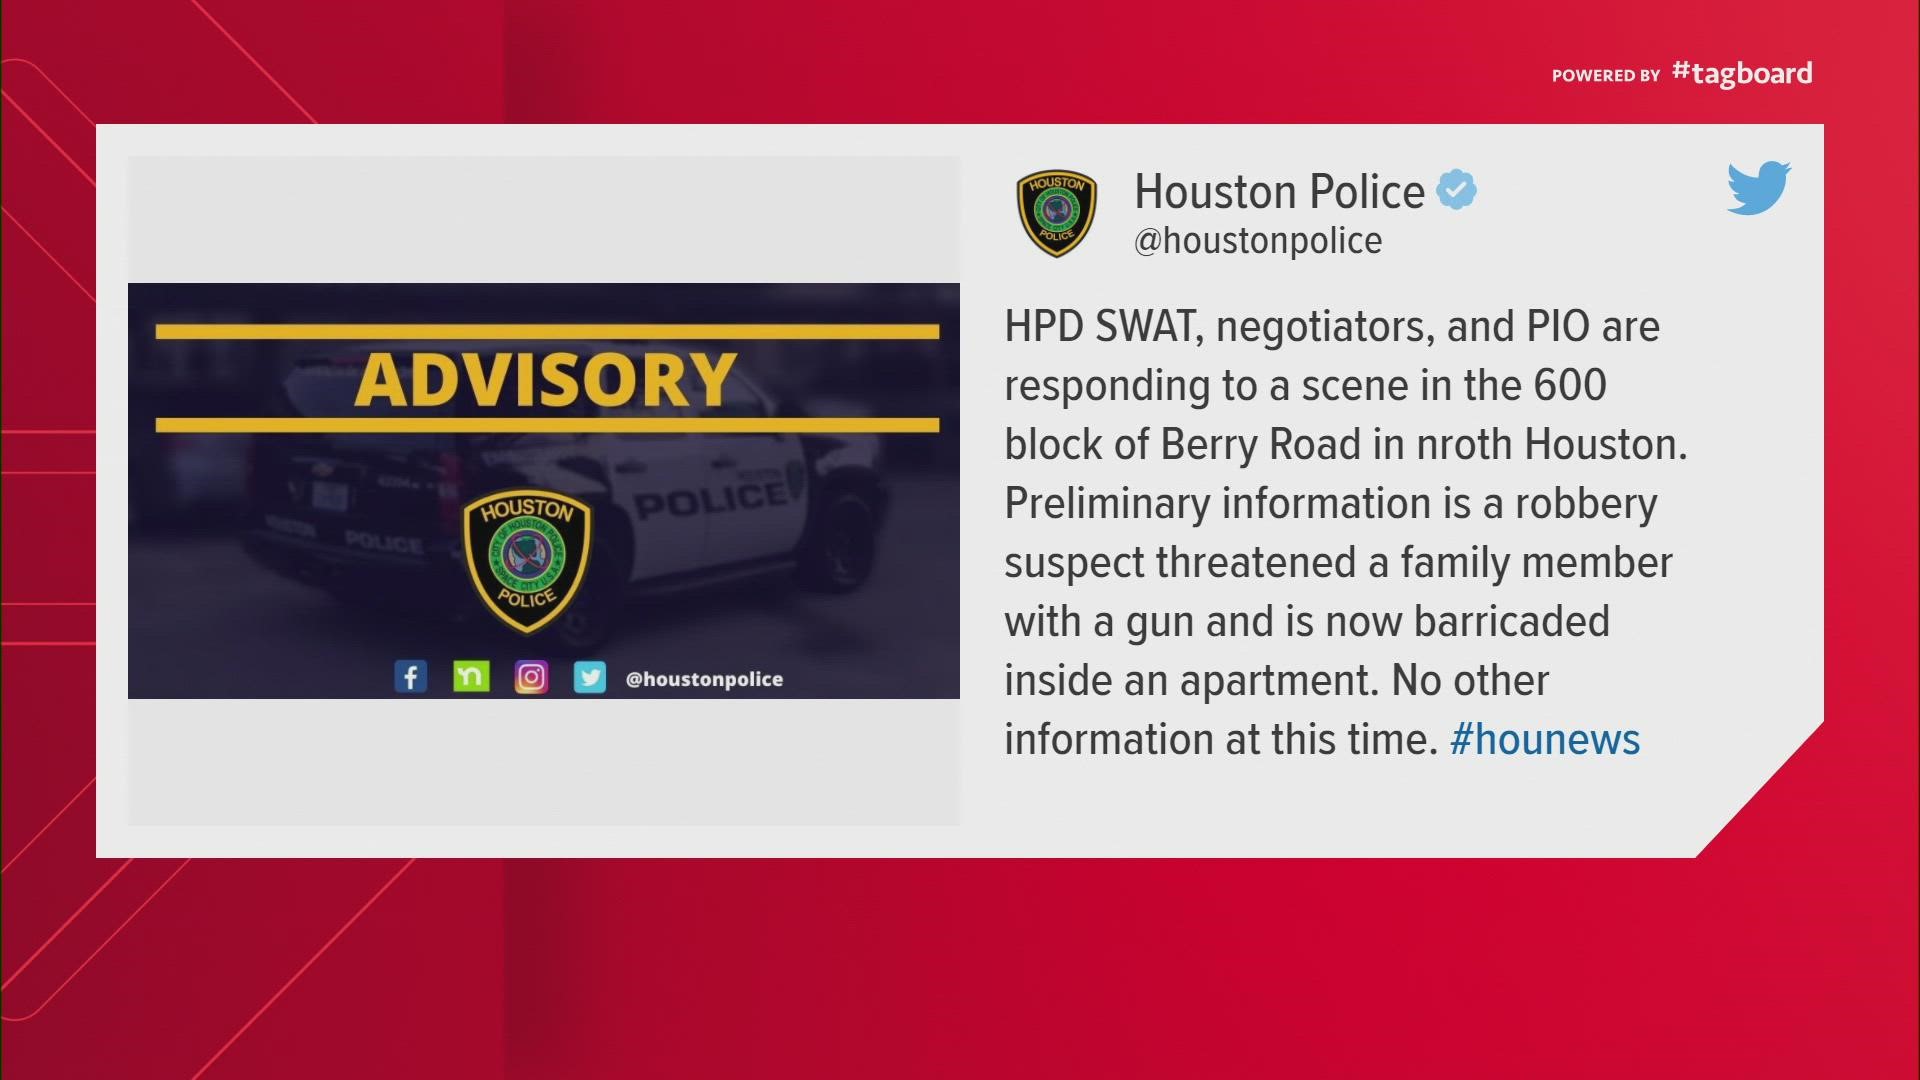 SWAT responded to a robbery suspect who barricaded themselves inside a north Houston apartment after threatening a family member with a gun.